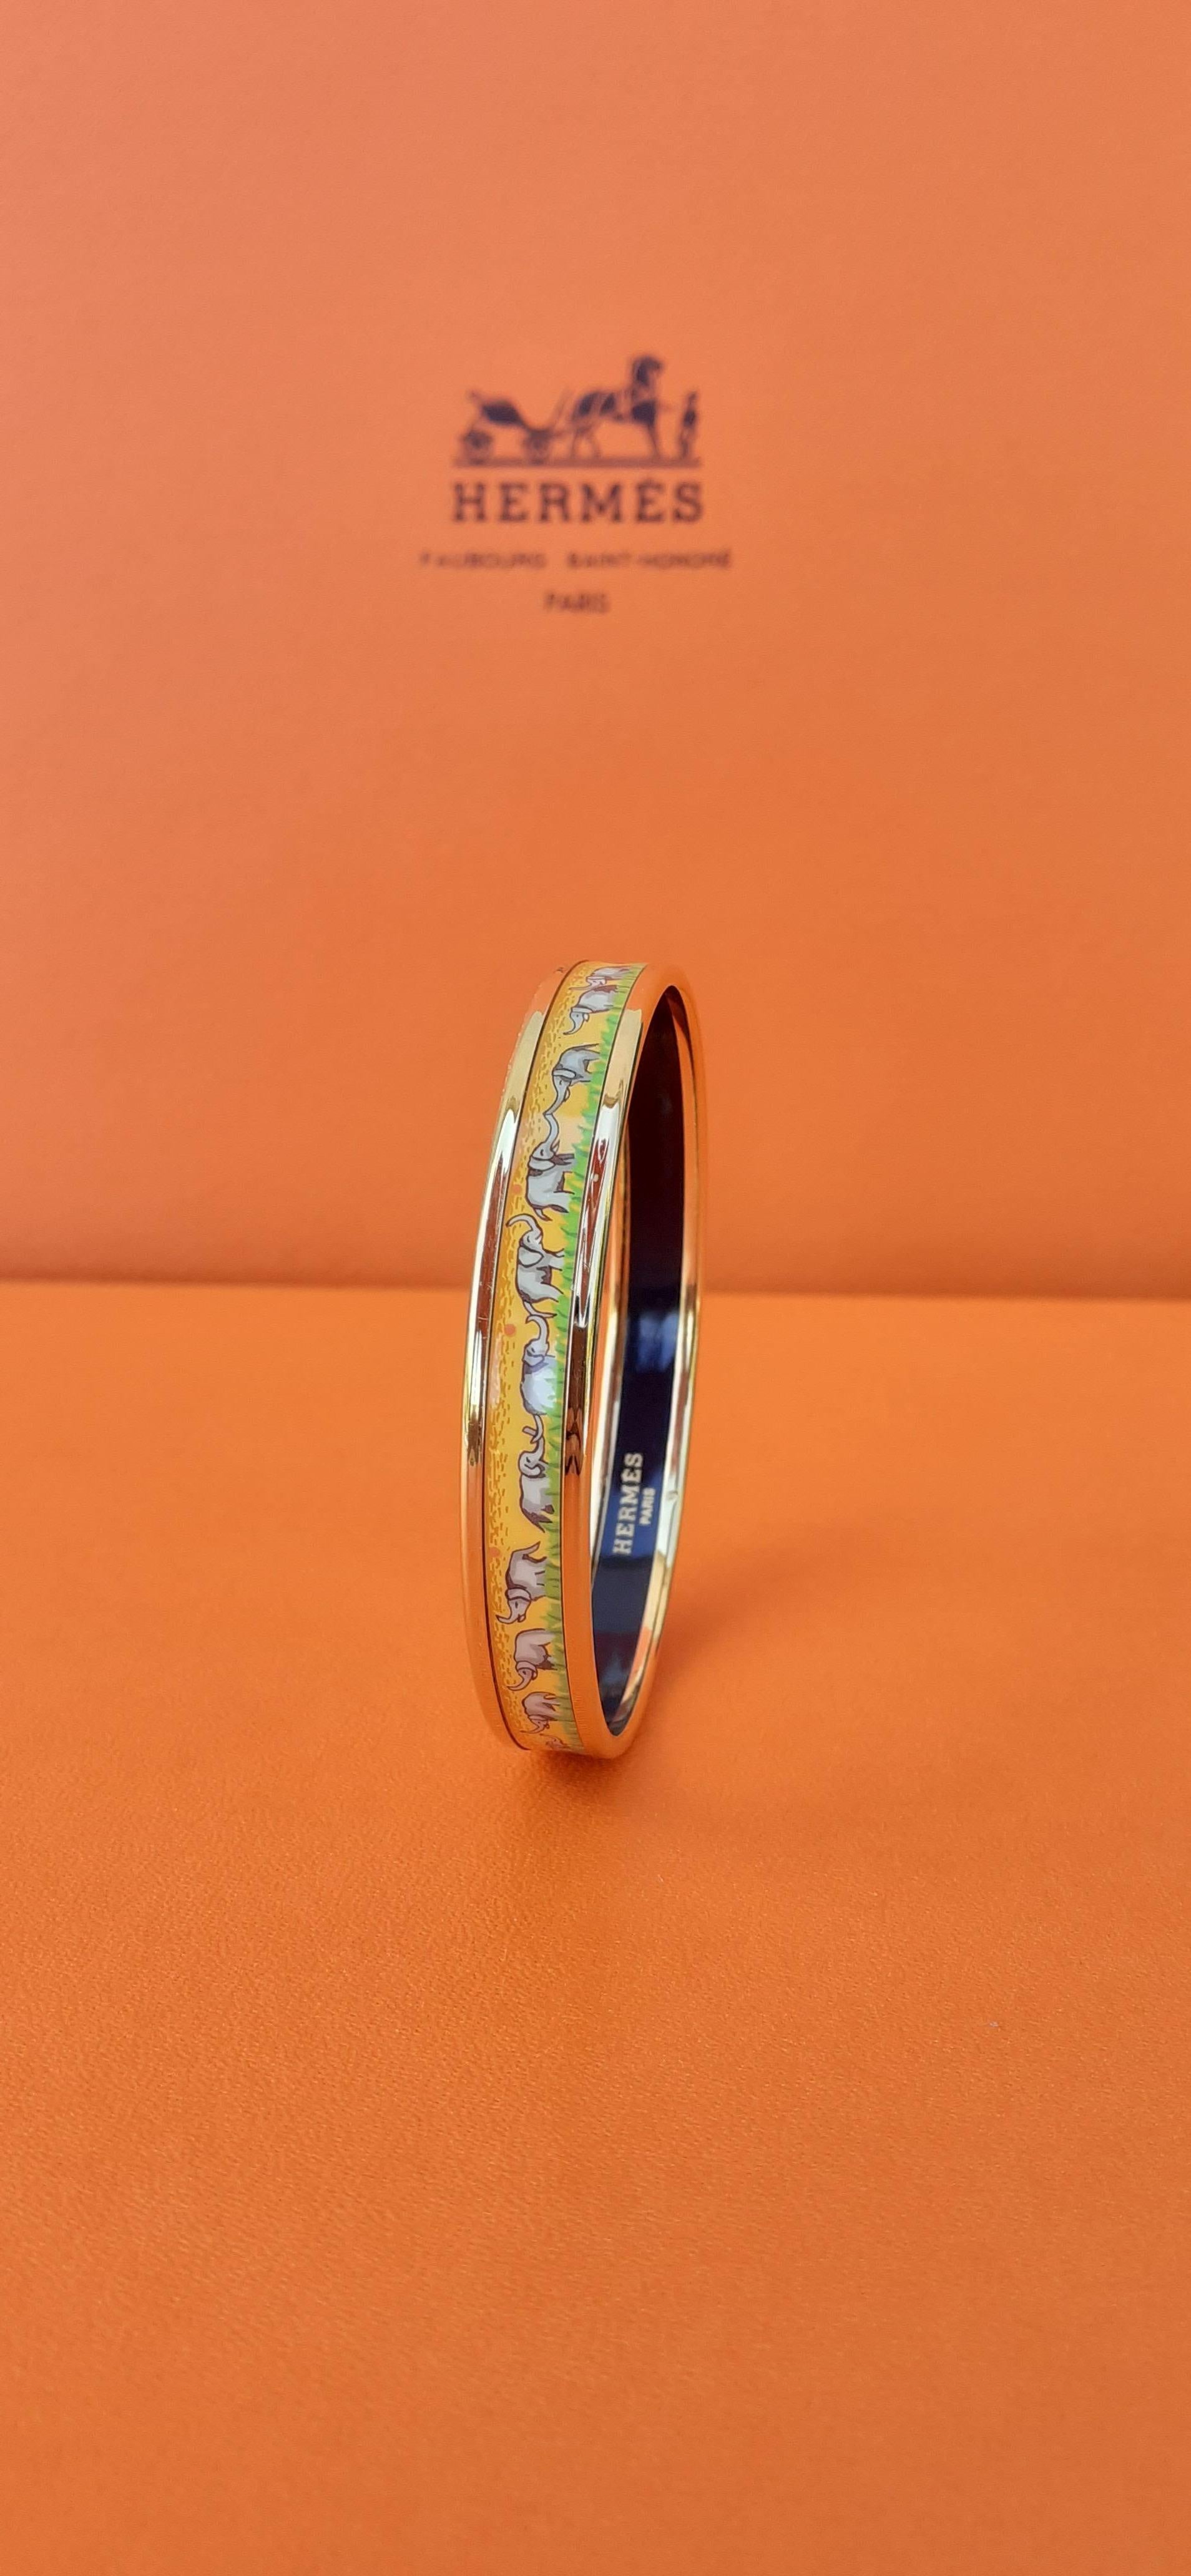 Gorgeous Authentic Hermès Bracelet

Pattern: Elephants Grazing

Hard to find ! One of the most thought after Hermès Bracelet

Made in Austria + F

Made of printed Enamel and Gold Plated Hardware

Colorways: Yellow background with discreet Pink peas,